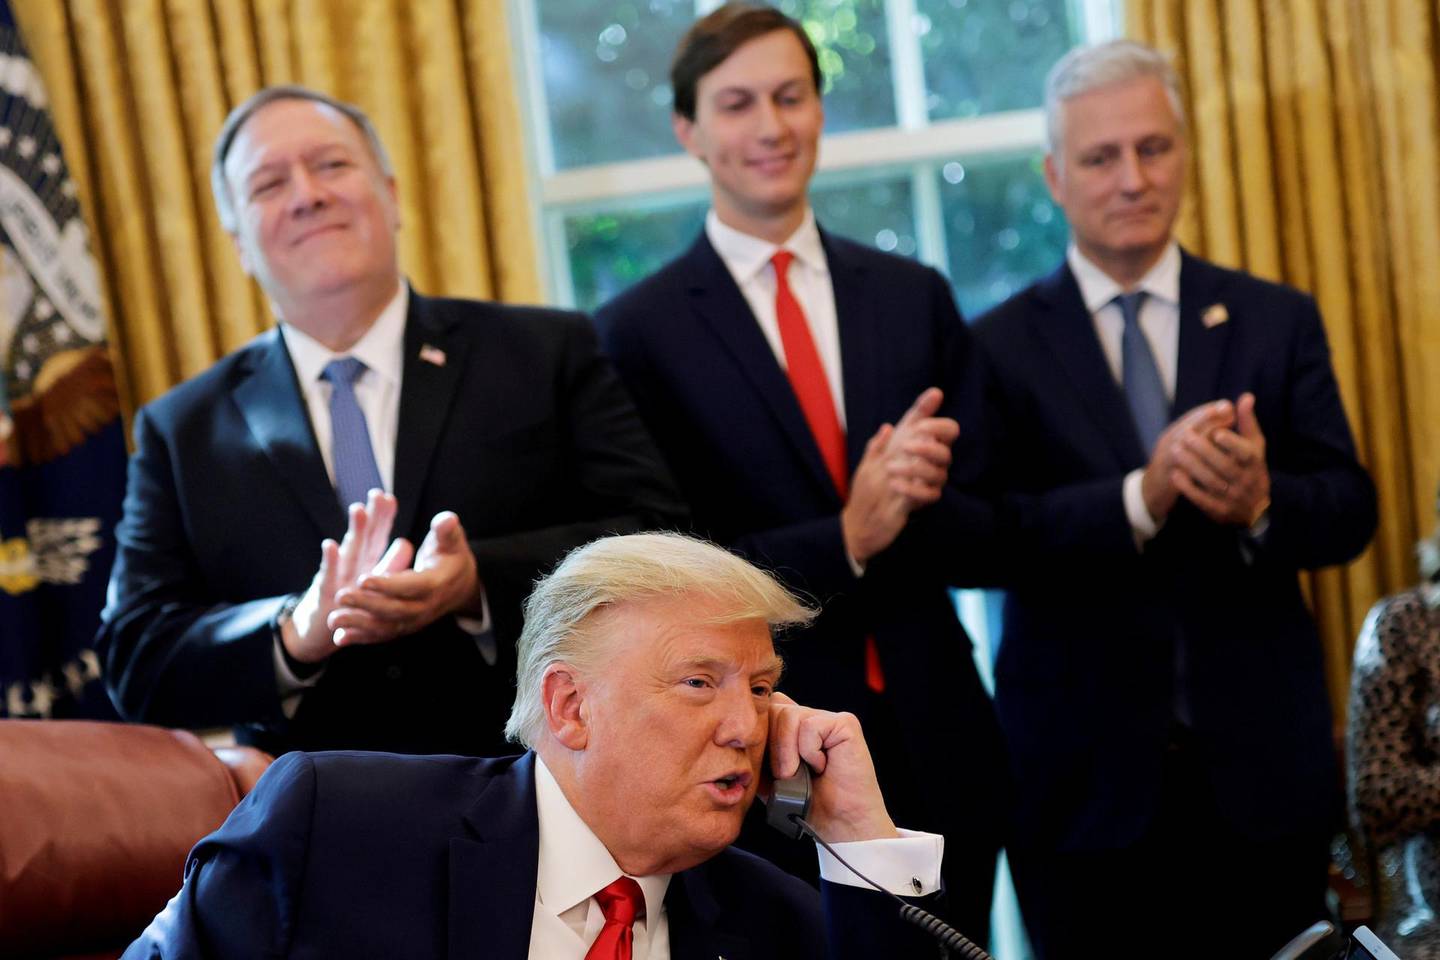 FILE PHOTO: Secretary of State Mike Pompeo and White House senior adviser Jared Kushner applaud as U.S. President Donald Trump is seen on the phone with leaders of Israel and Sudan speaking about the decision to rescind Sudan's designation as a state sponsor of terrorism, in the Oval Office at the White House in Washington, U.S., October 23, 2020. REUTERS/Carlos Barria/File Photo